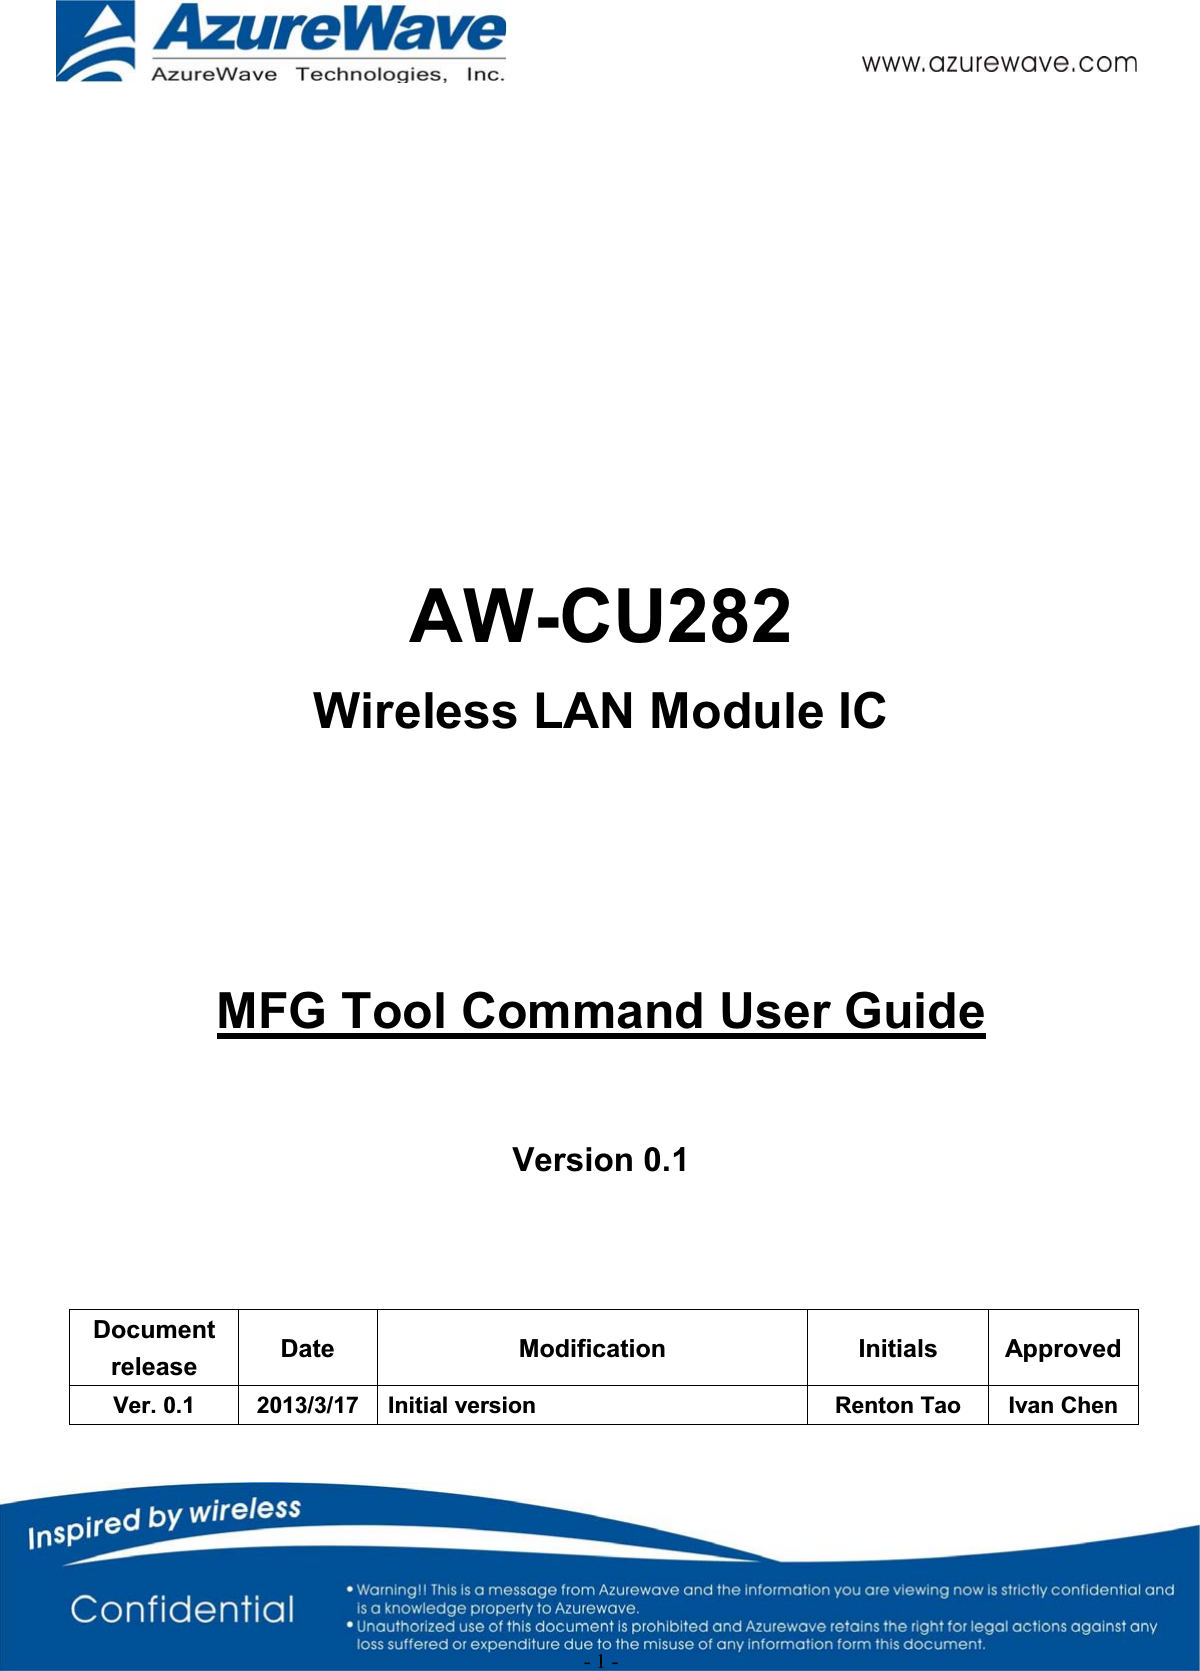                                                  - 1 - AW-CU282Wireless LAN Module ICMFG Tool Command User GuideVersion 0.1 Document release  Date Modification  Initials ApprovedVer. 0.1  2013/3/17 Initial version  Renton Tao  Ivan Chen 